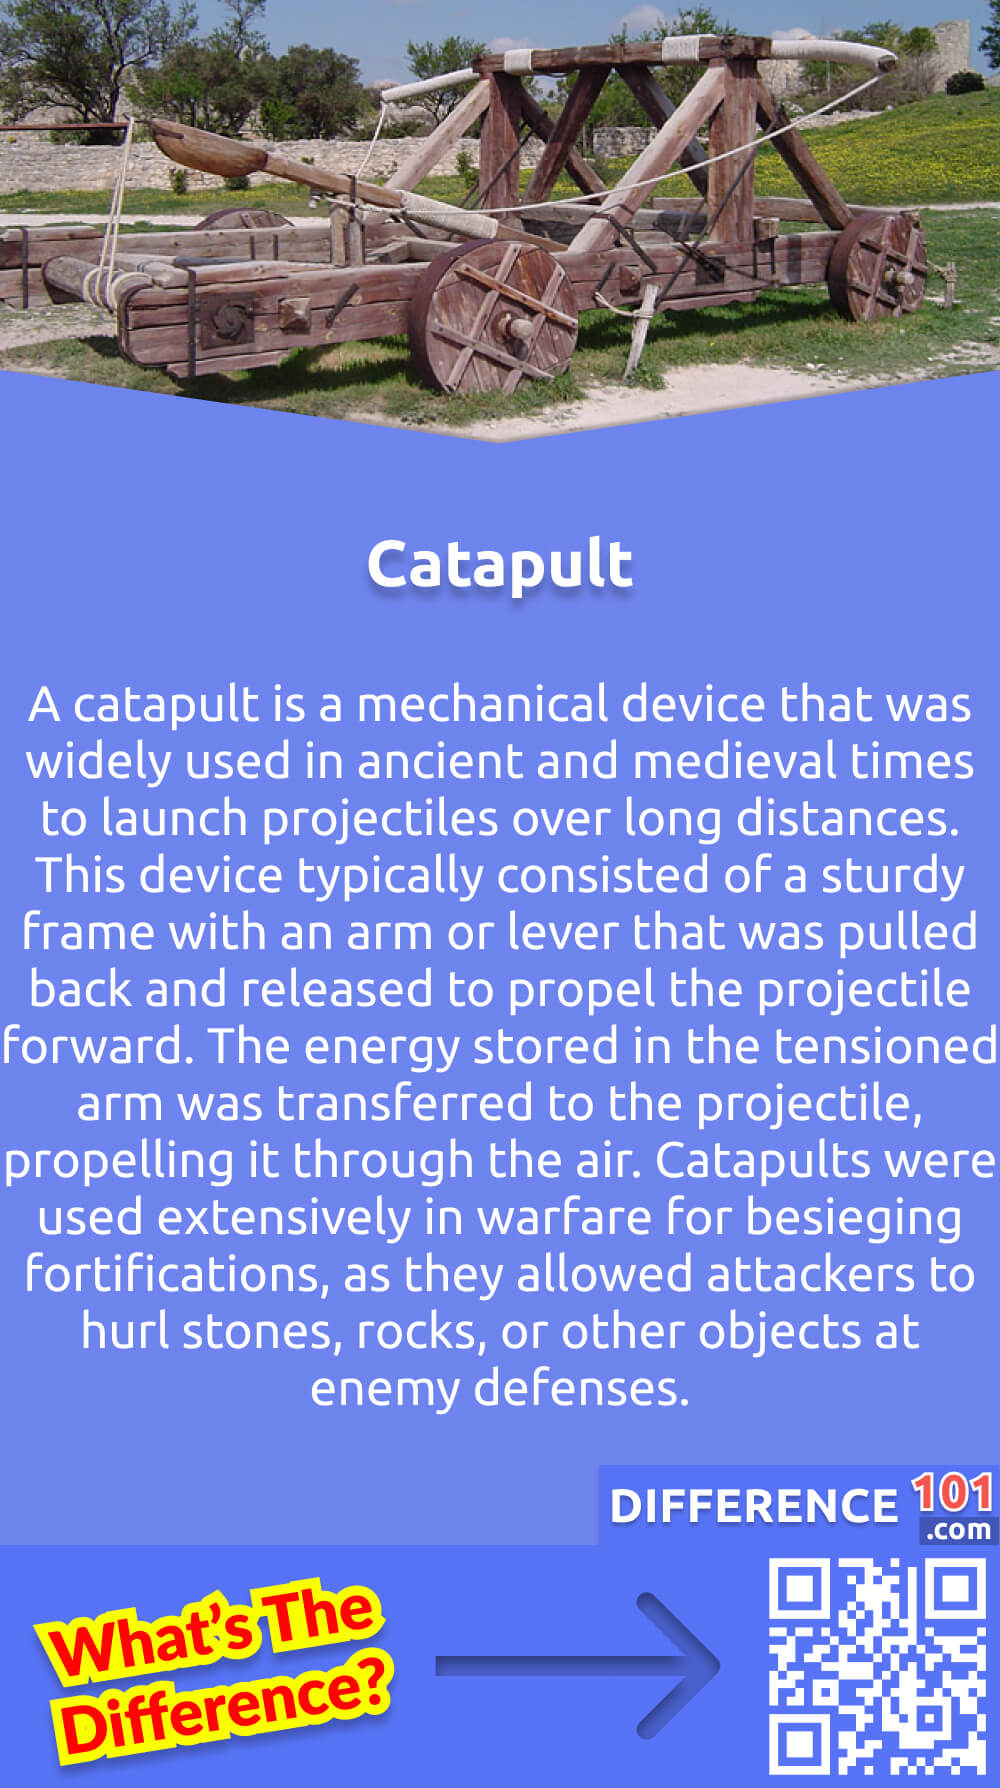 What Is Catapult? A catapult is a mechanical device that was widely used in ancient and medieval times to launch projectiles over long distances. This device typically consisted of a sturdy frame with an arm or lever that was pulled back and released to propel the projectile forward. The energy stored in the tensioned arm was transferred to the projectile, propelling it through the air. Catapults were used extensively in warfare for besieging fortifications, as they allowed attackers to hurl stones, rocks, or other objects at enemy defenses. This mechanical device was an important tool in ancient and medieval warfare, and its use has been documented in numerous historical accounts. Today, catapults are still used for educational and recreational purposes.